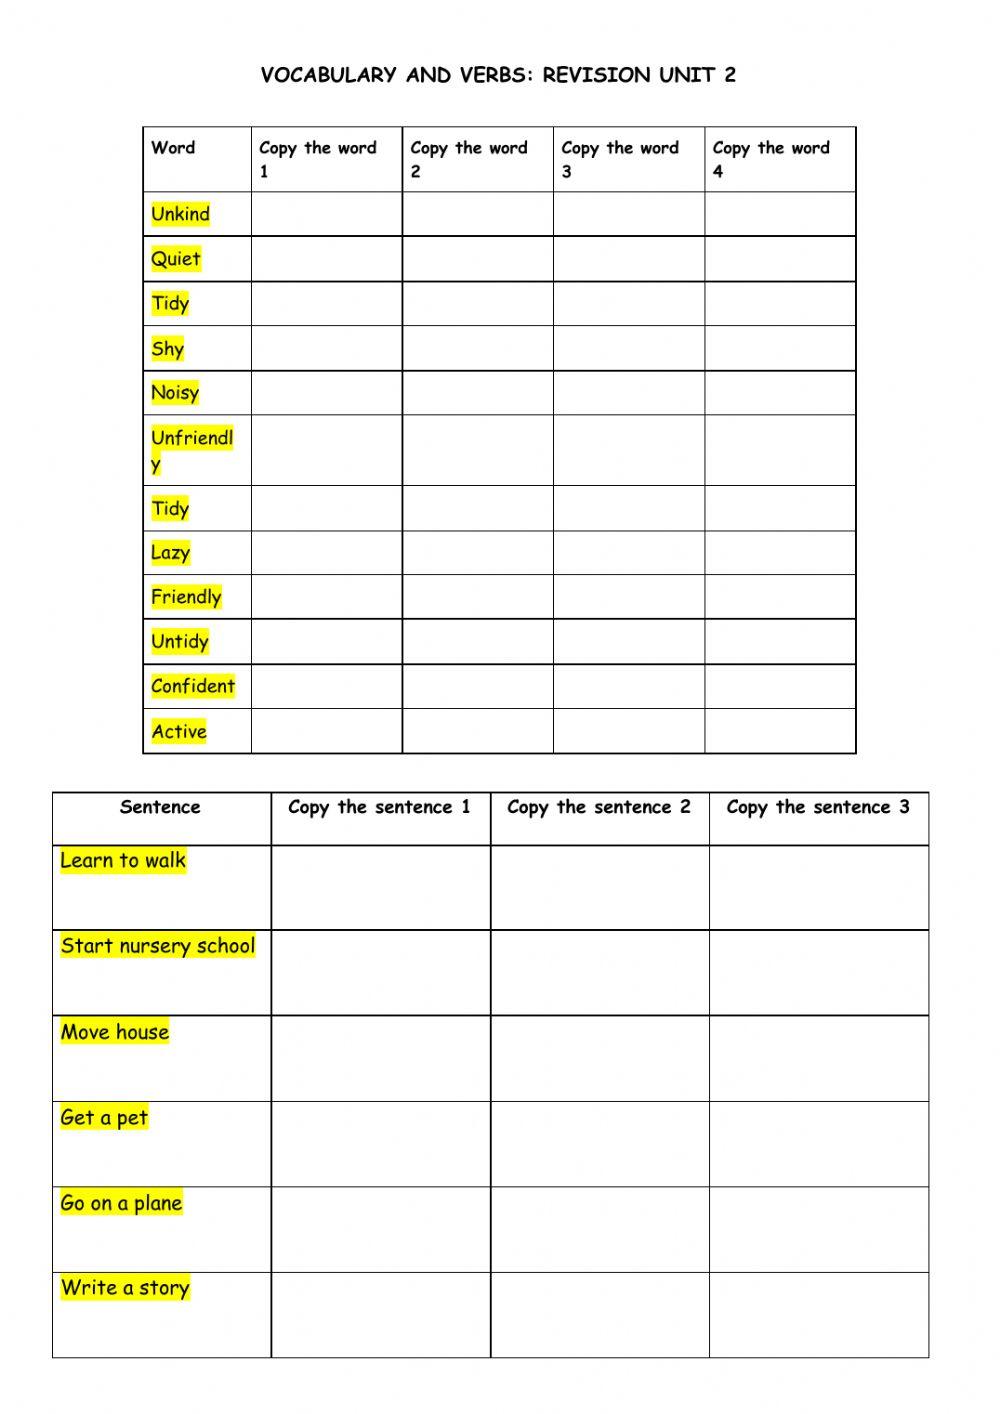 Vocabulary and verbs: Revision unit 2